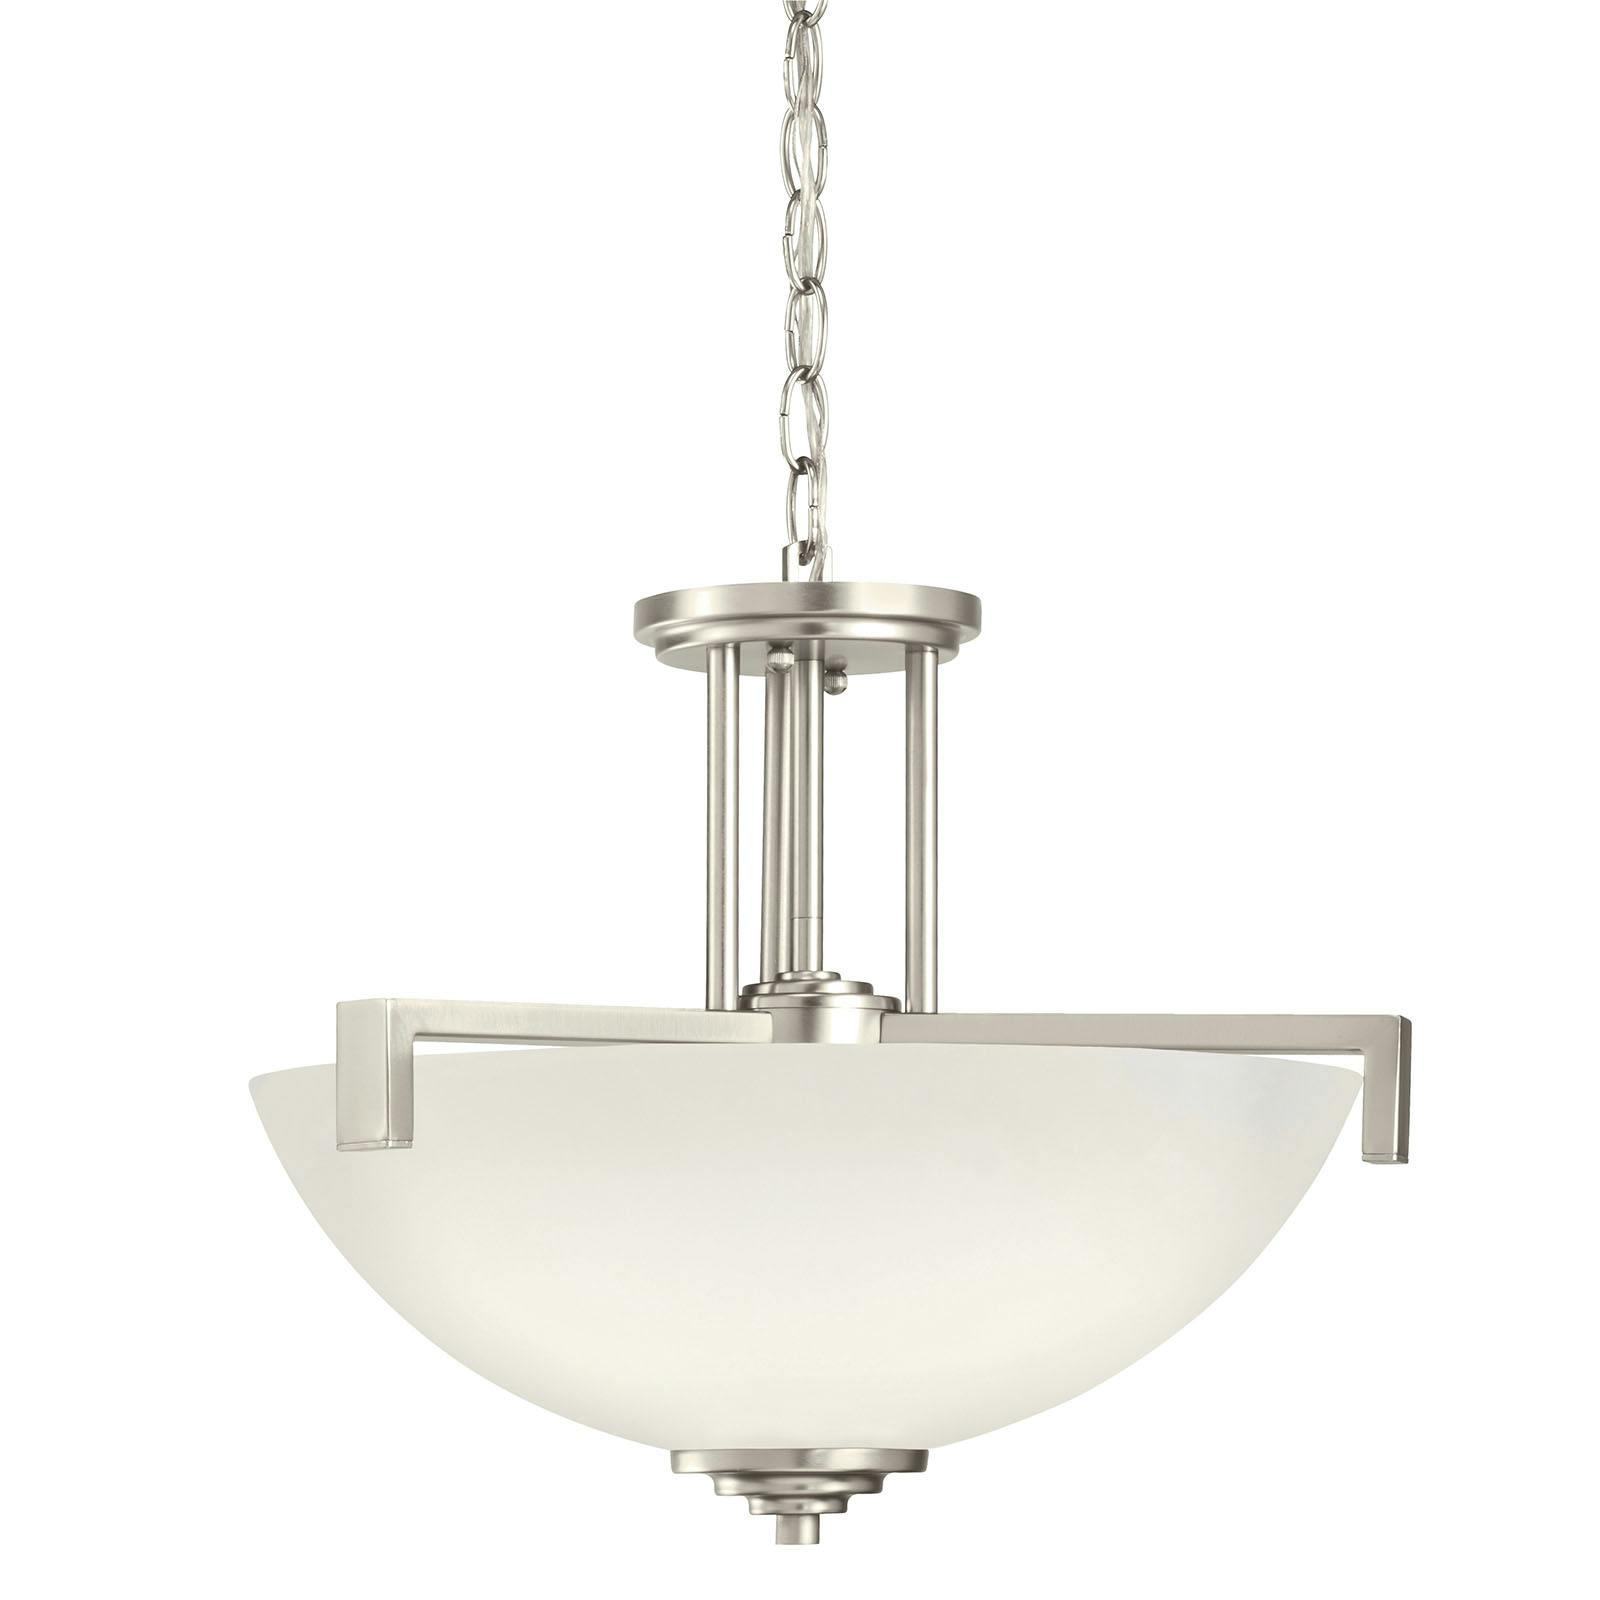 Product image of the 3797NI shown hung as a pendant